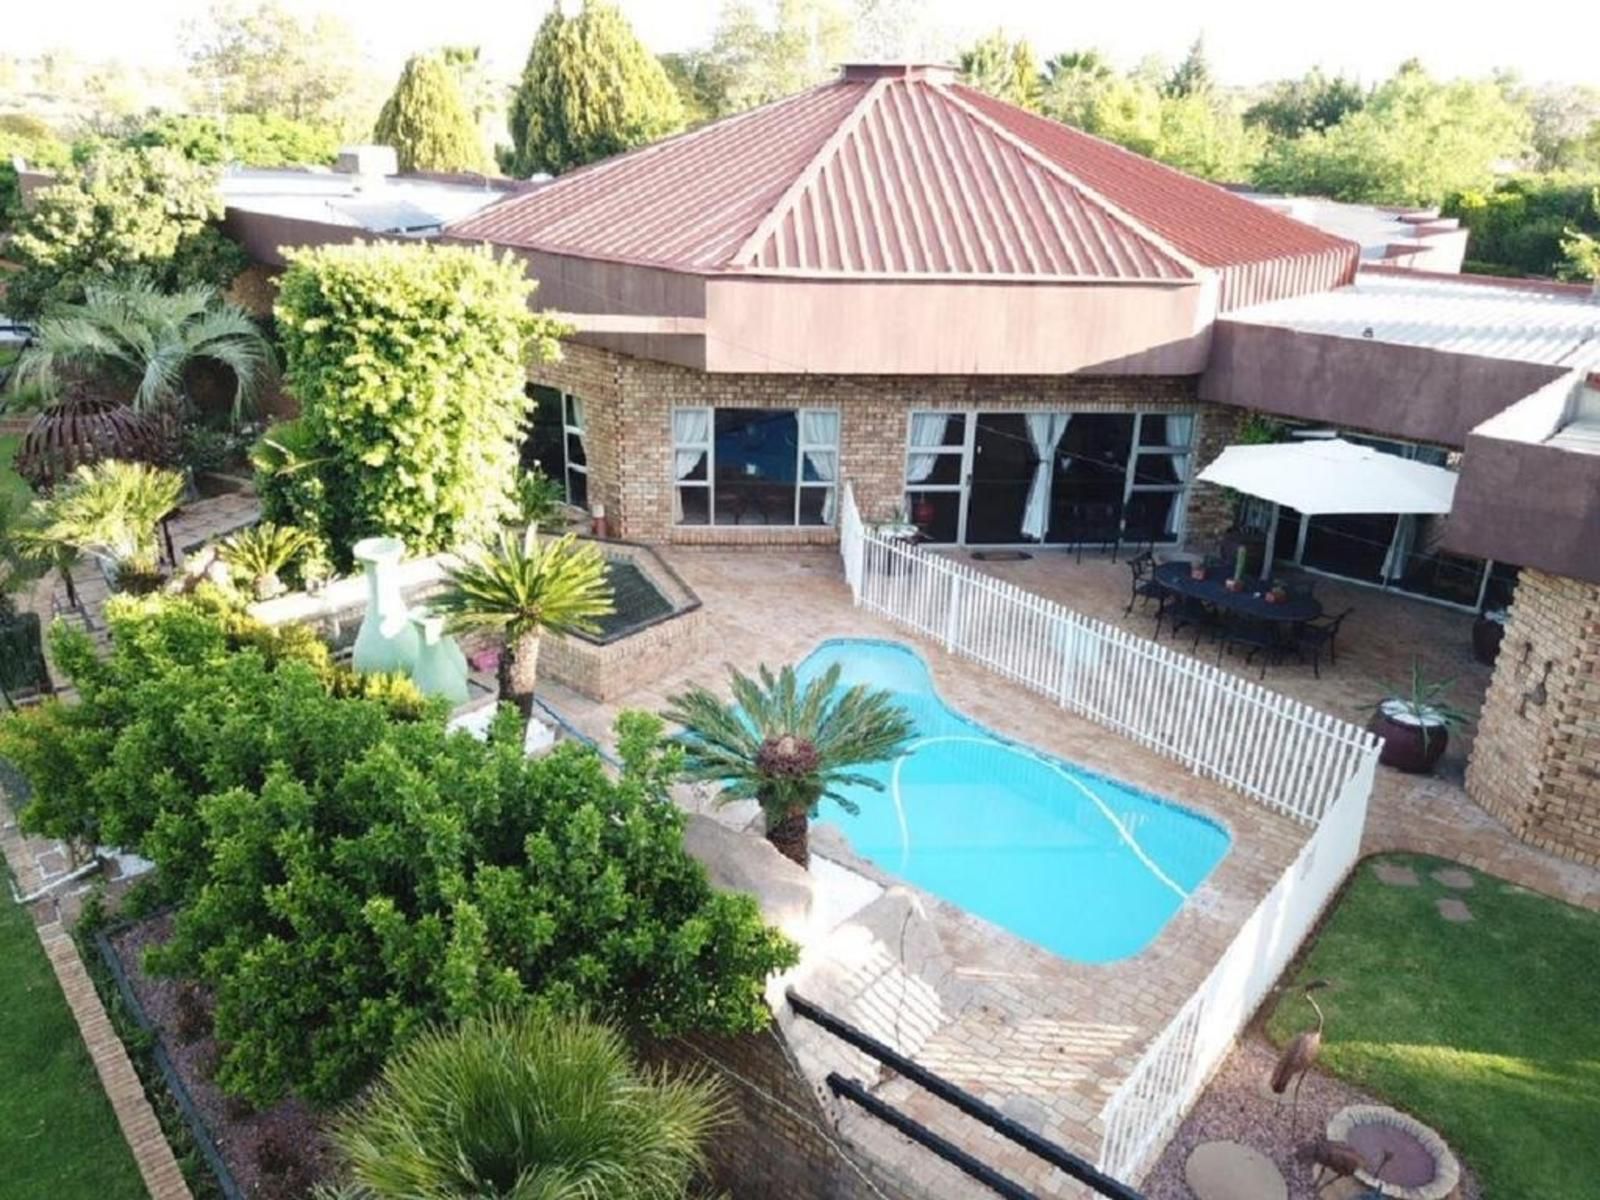 Leach Lodge Kuruman Northern Cape South Africa House, Building, Architecture, Garden, Nature, Plant, Swimming Pool